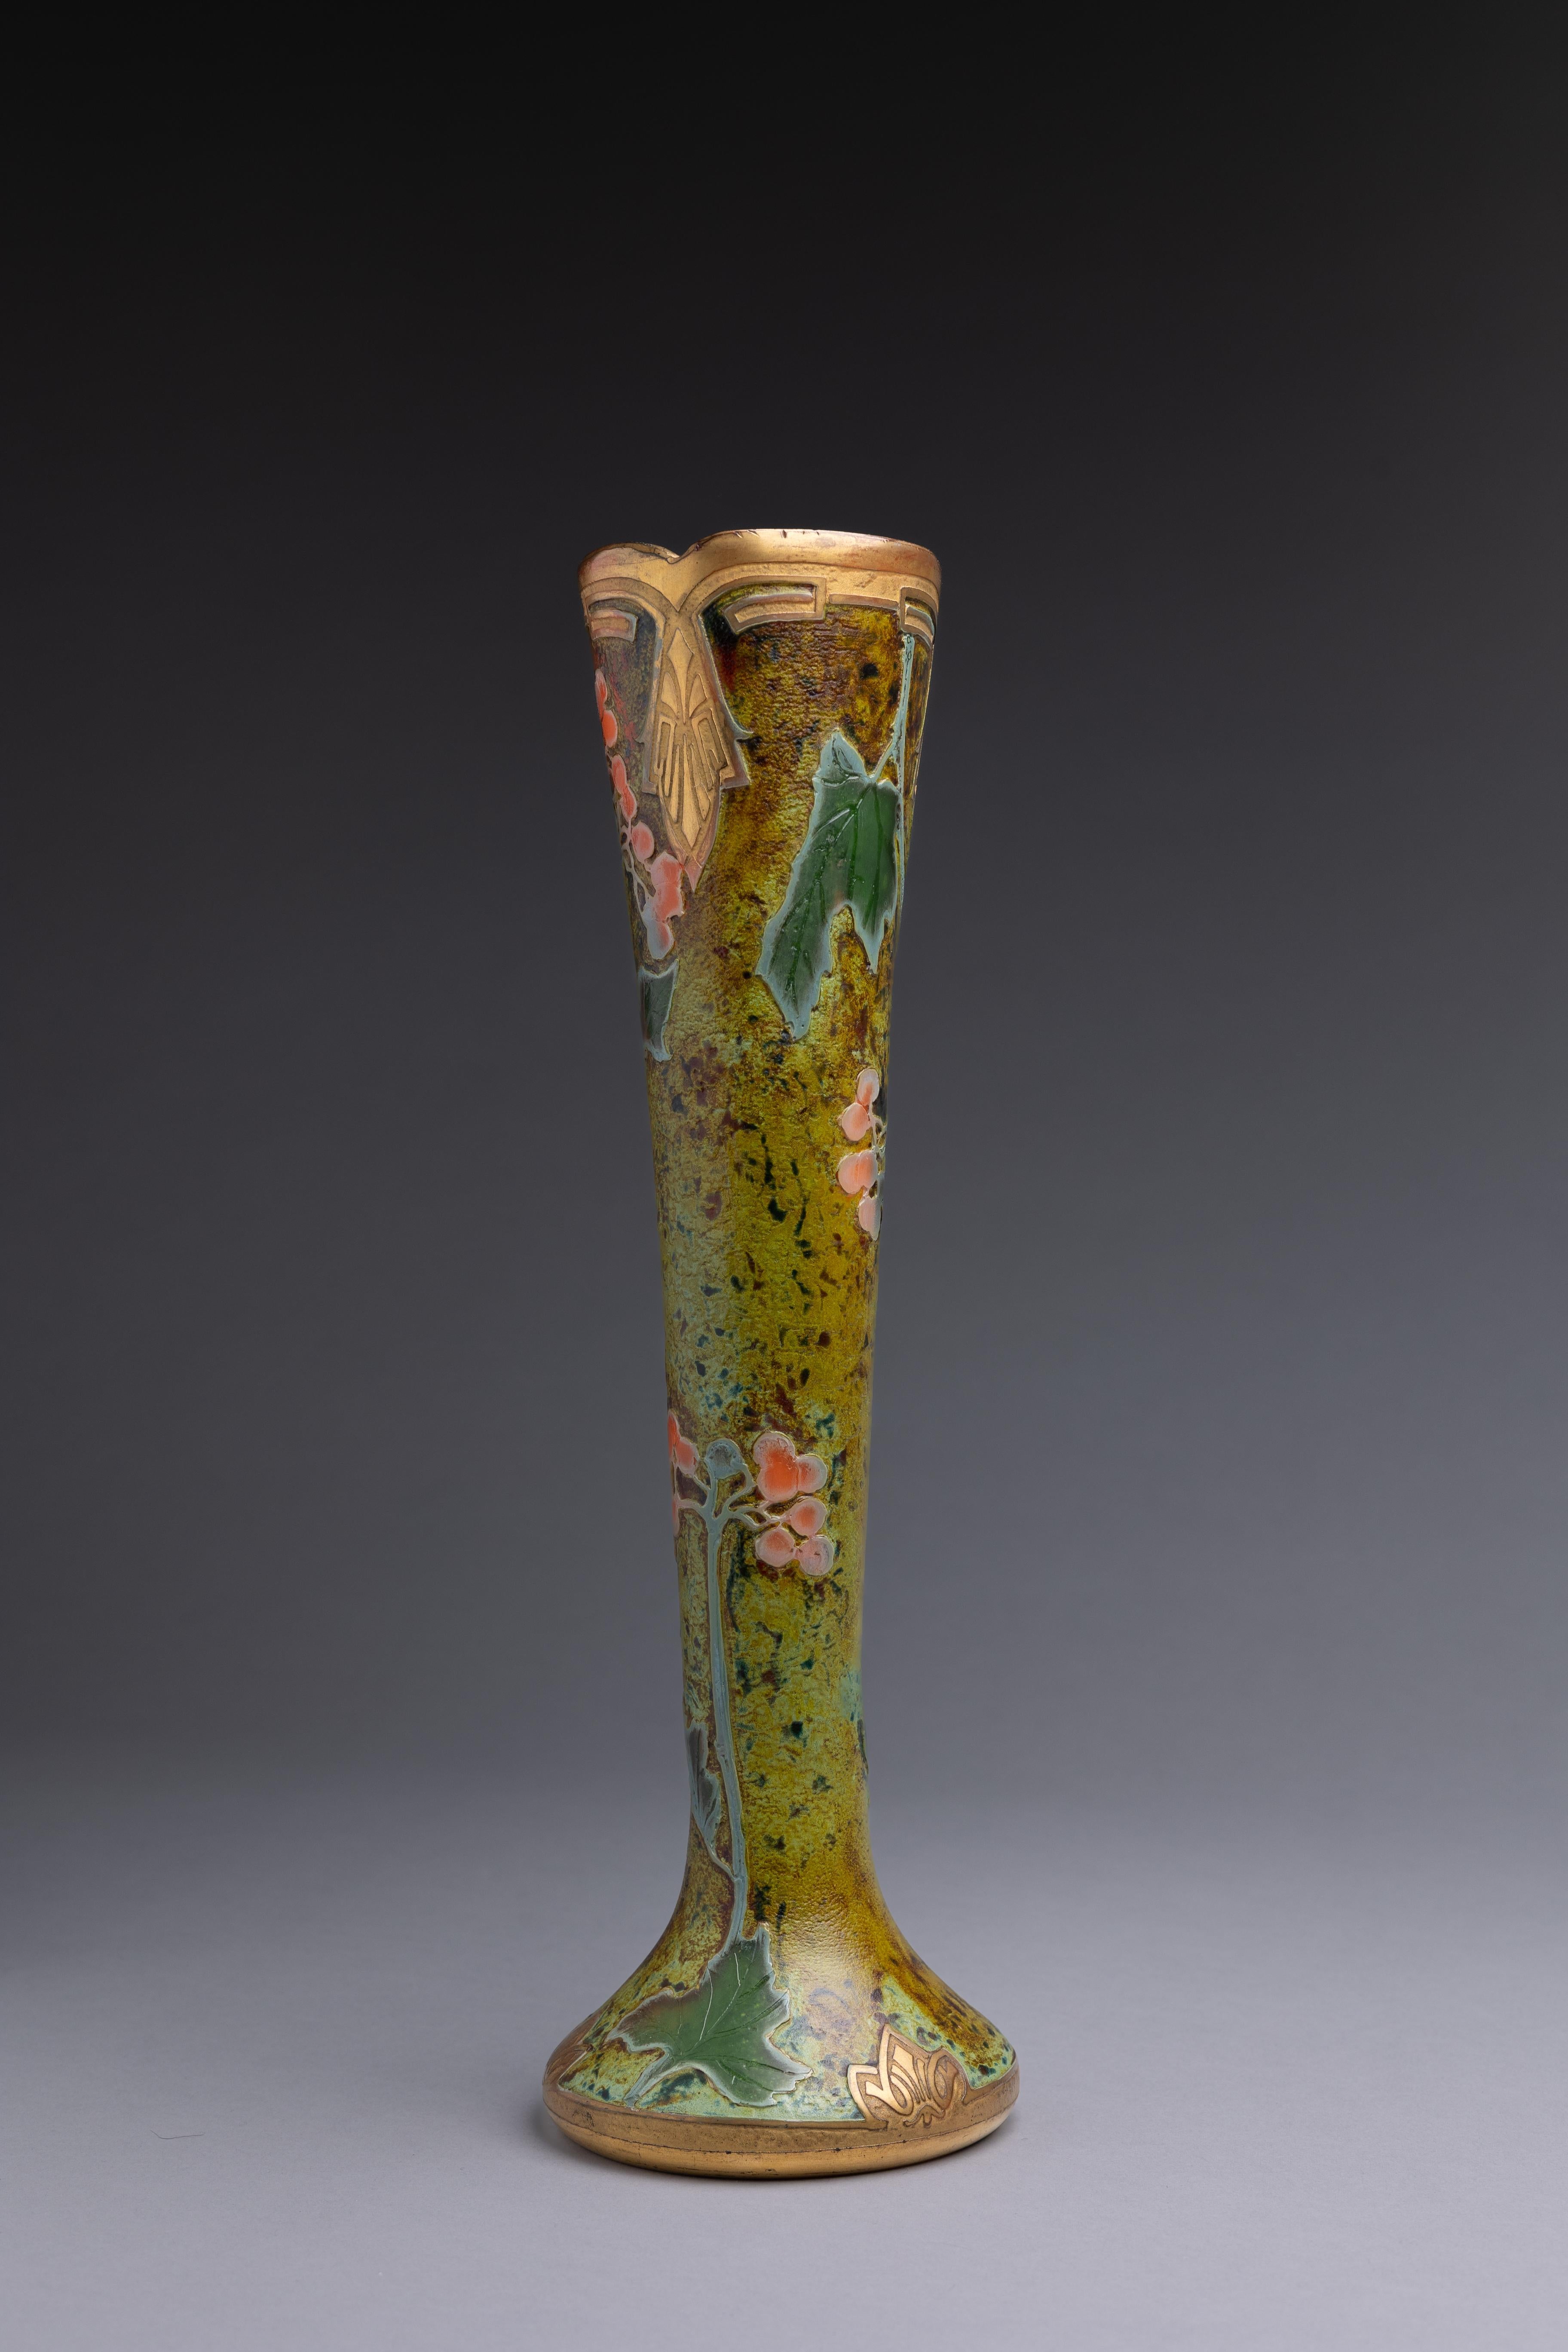 An Art Nouveau glass vase, made by the French glass manufactory Legras et Cie circa 1900-1914.

France became the center for art glass production in the early 20th century, with names such as Gallé, Daum, and Lalique dominating the market at home